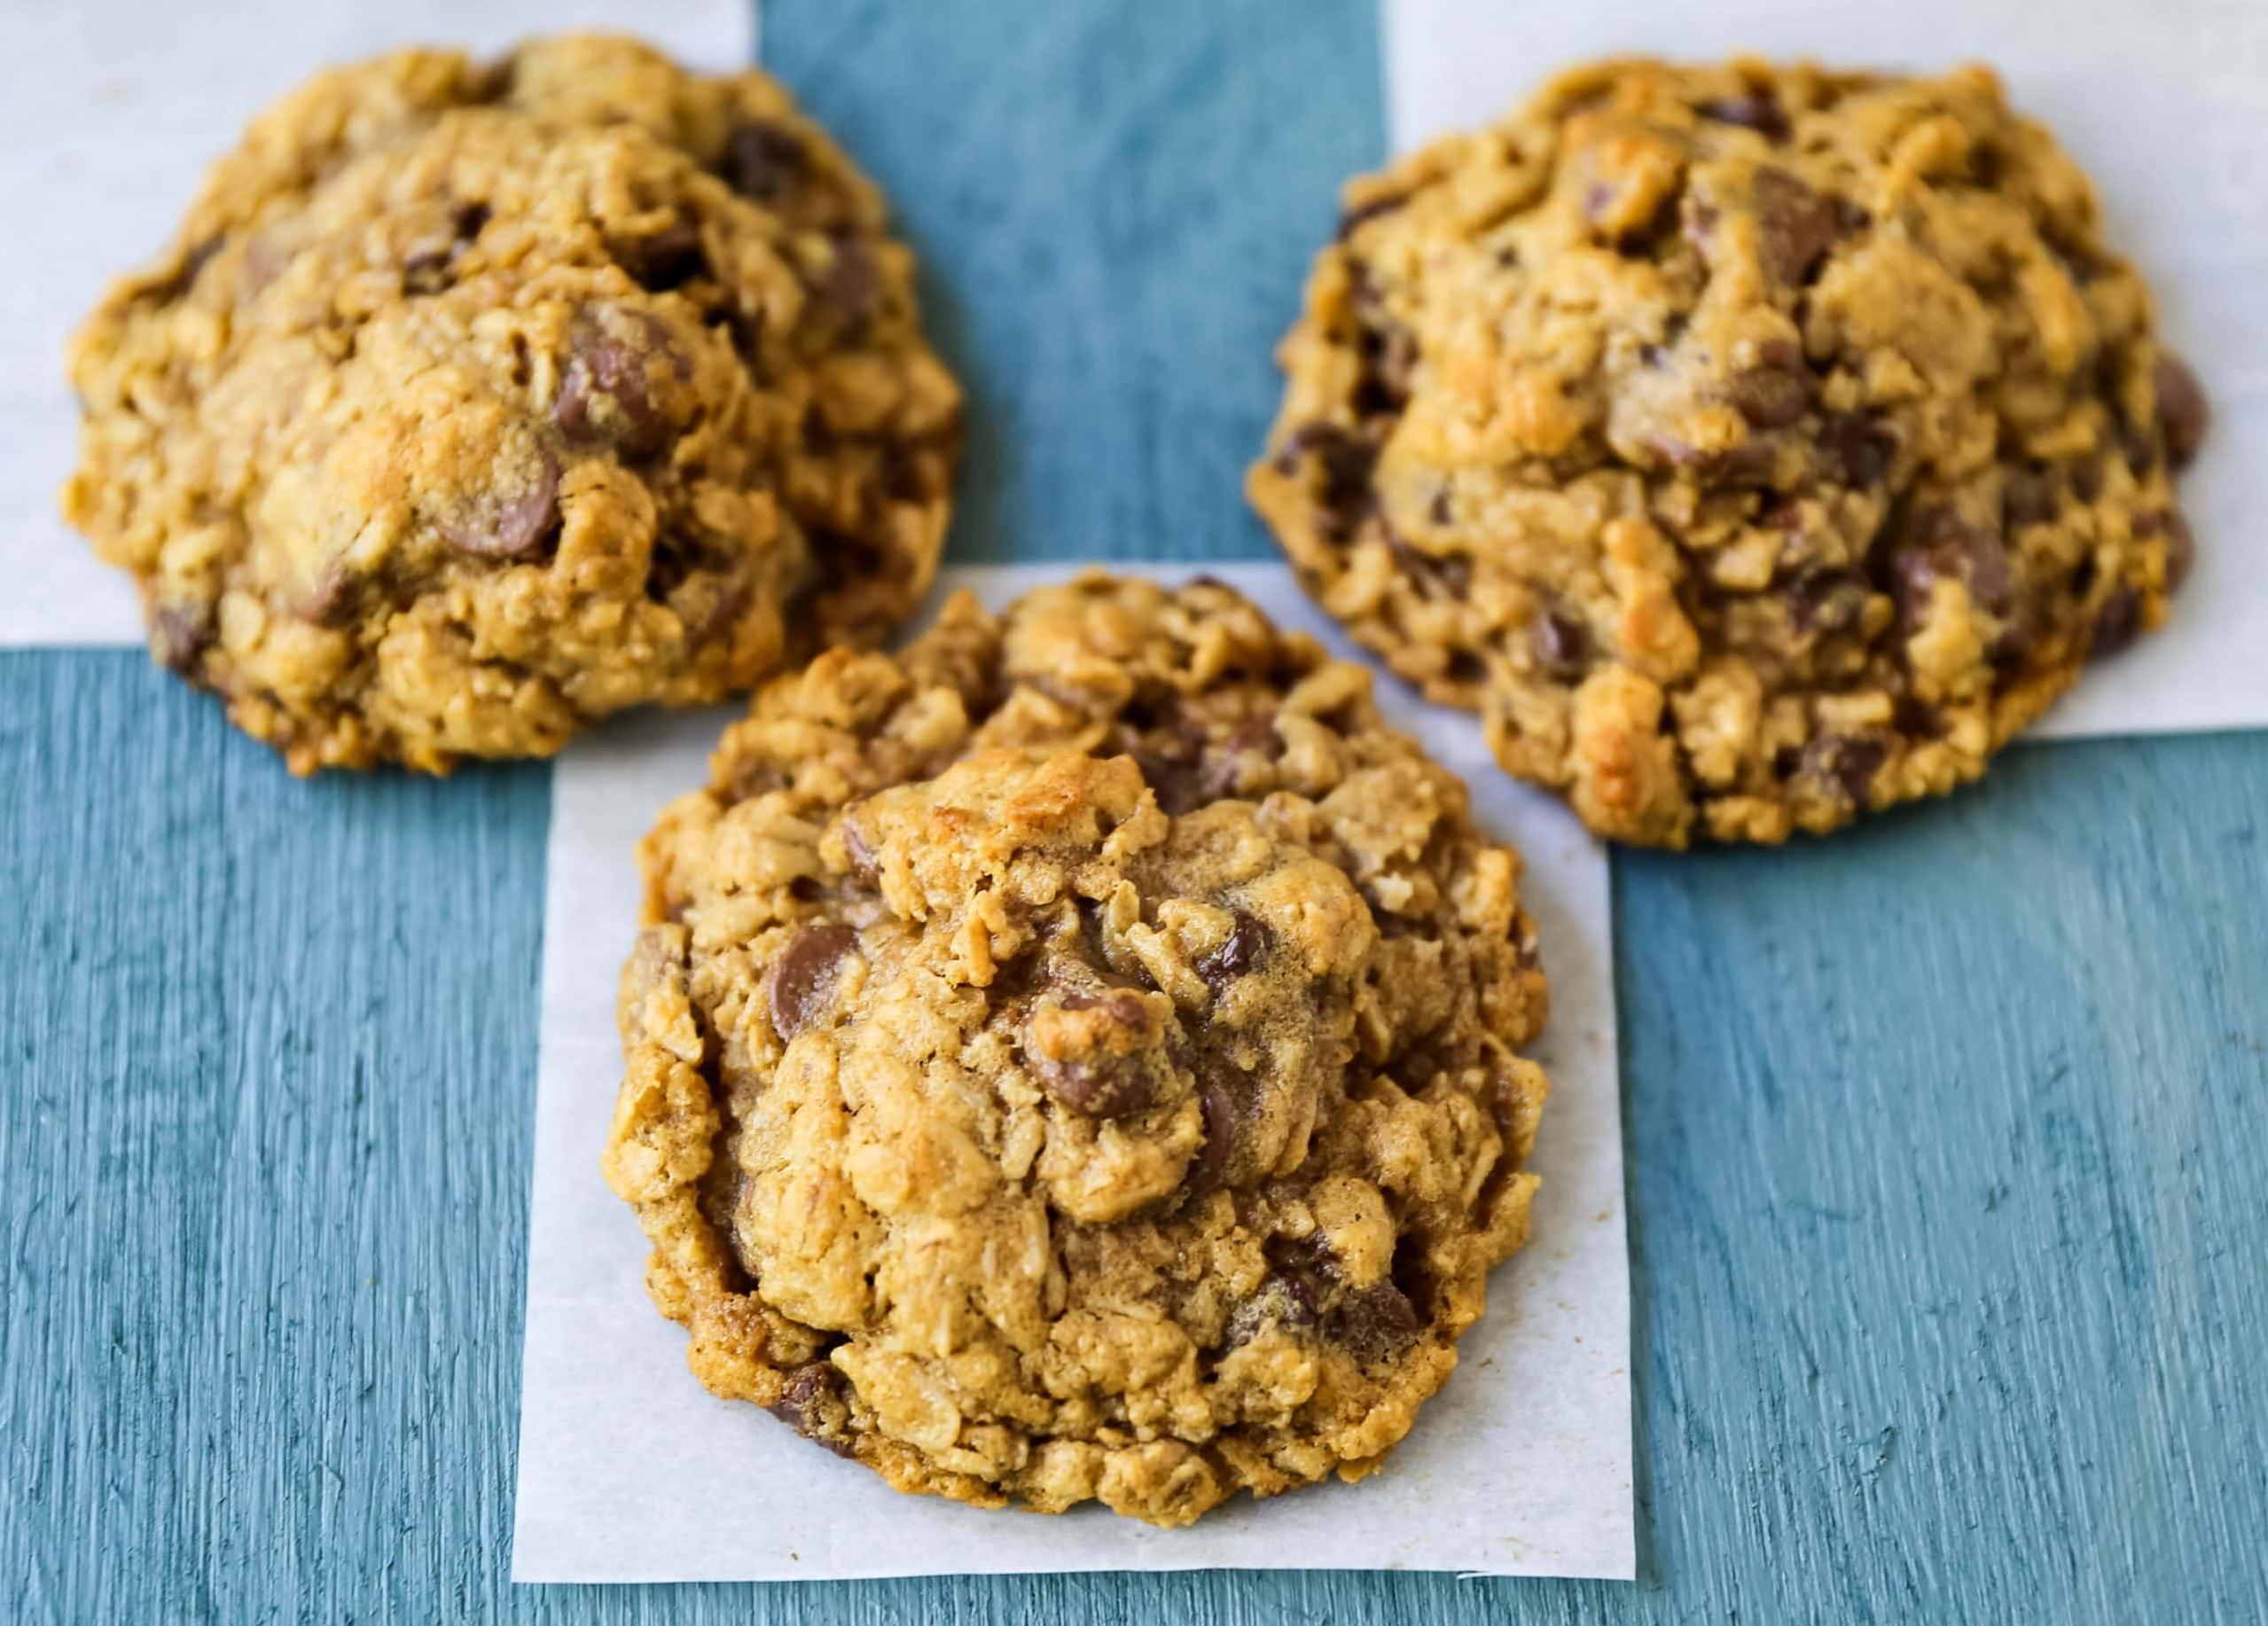  The perfect balance of fiber and protein, these peanut butter cookies are a treat for the palate and the tummy.